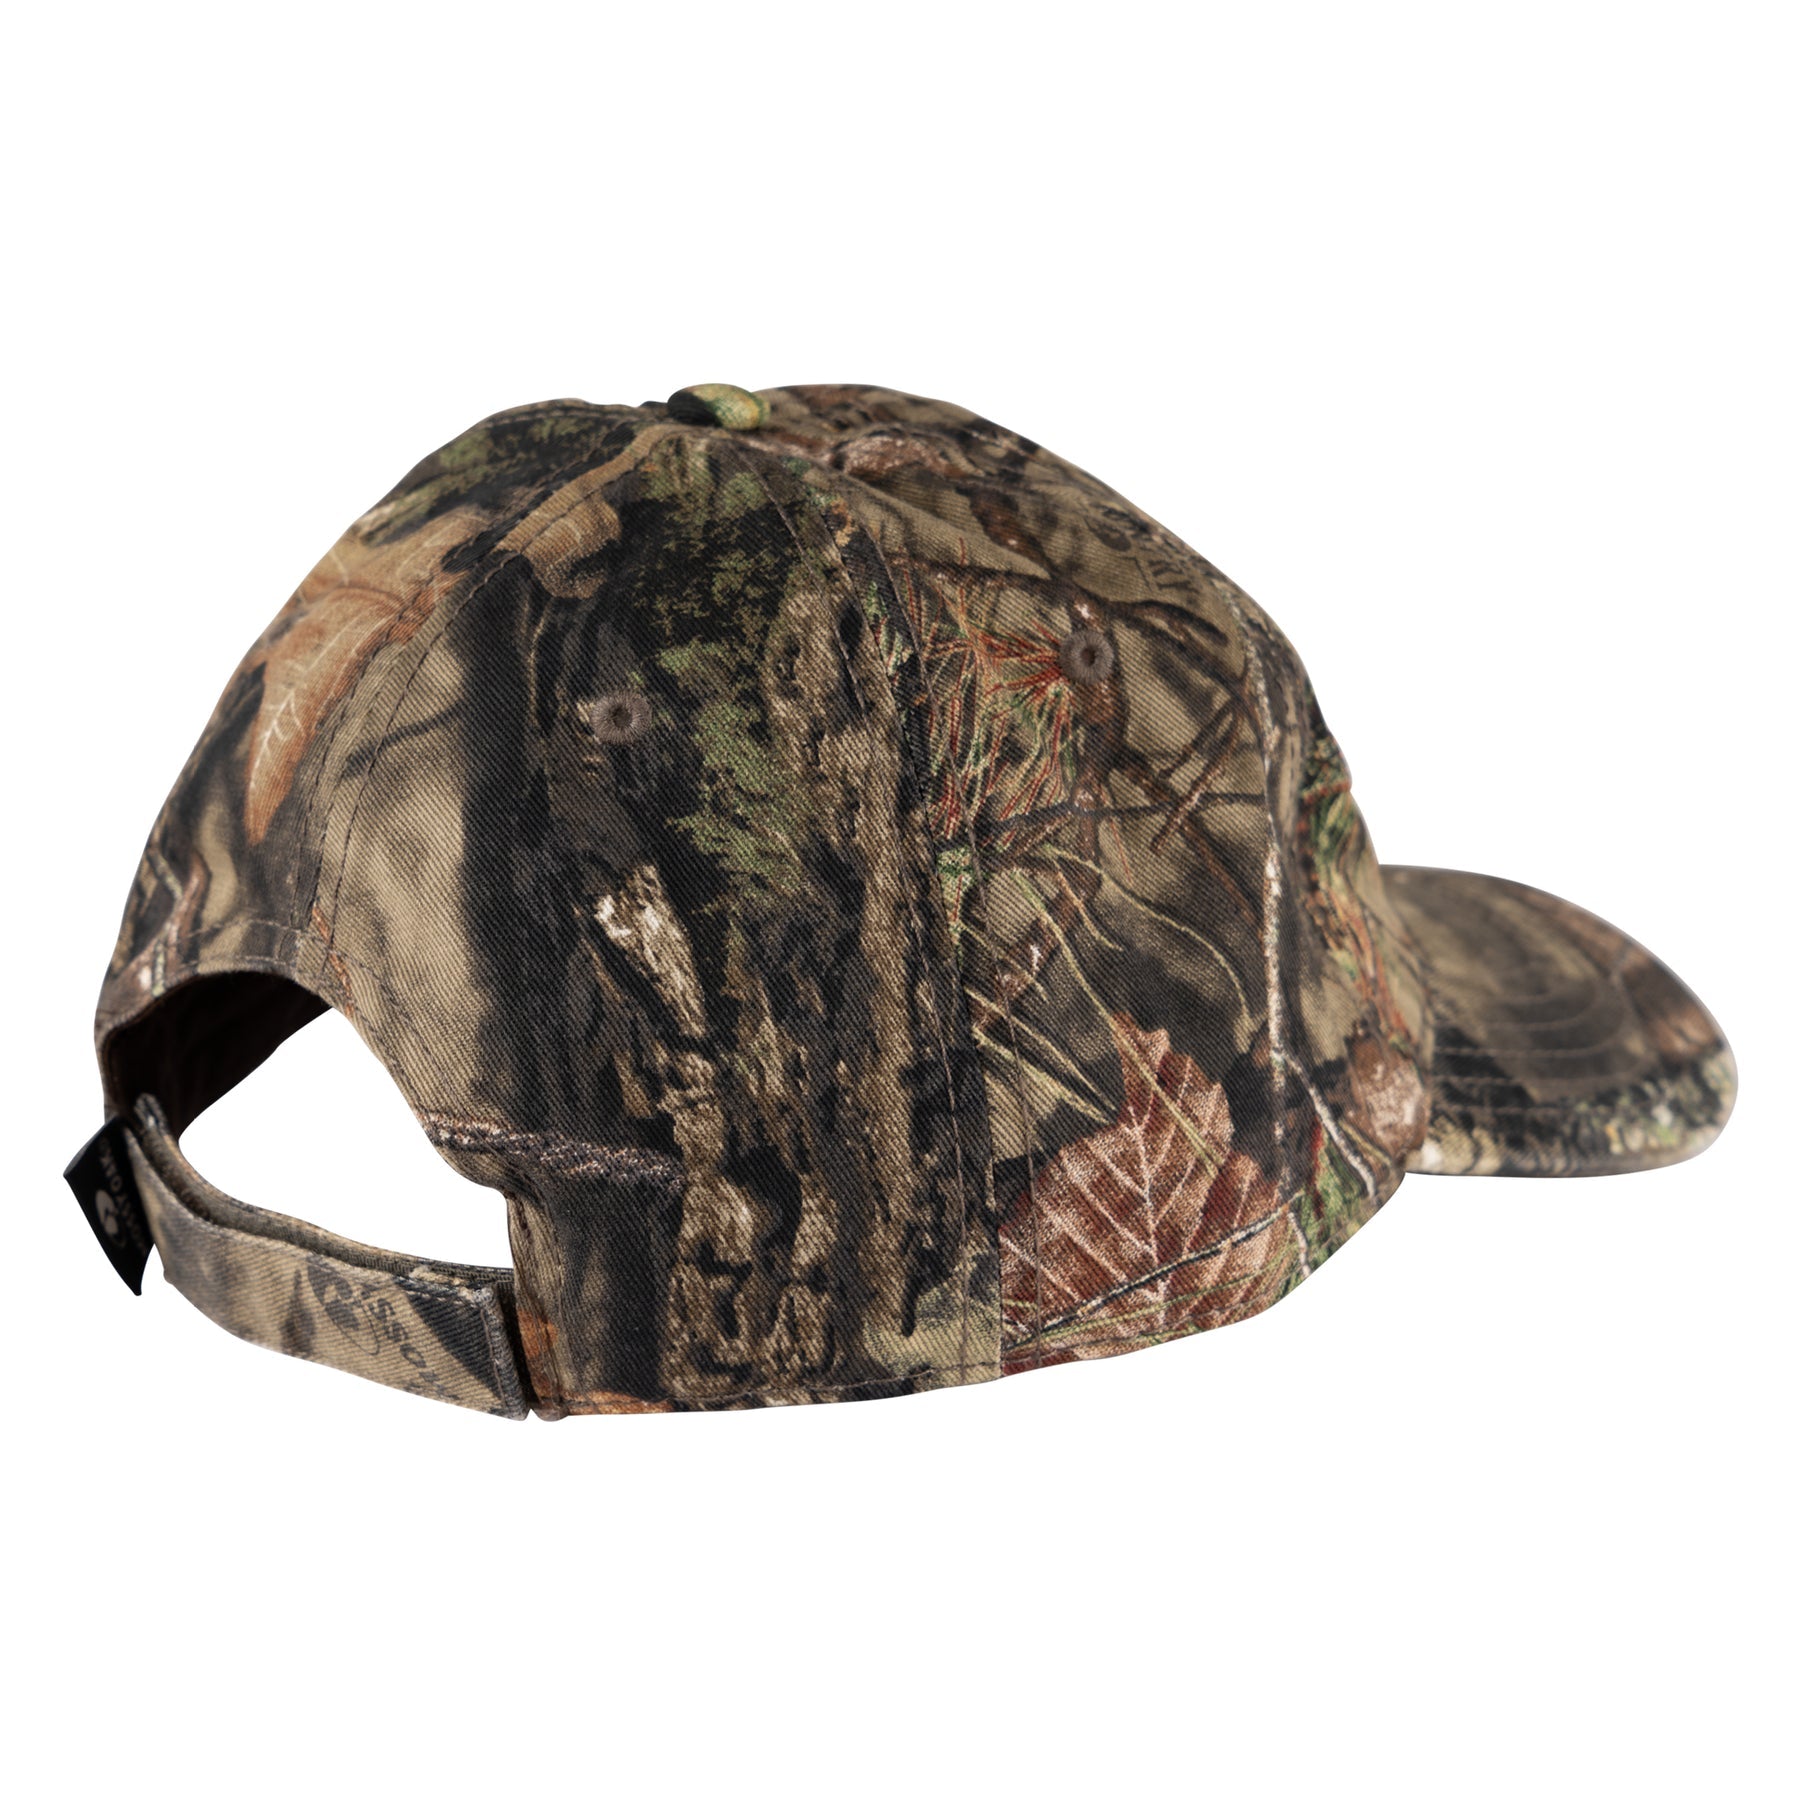 WELCOME BARB EMBROIDERED HAT CAMO - The Drive Skateshop